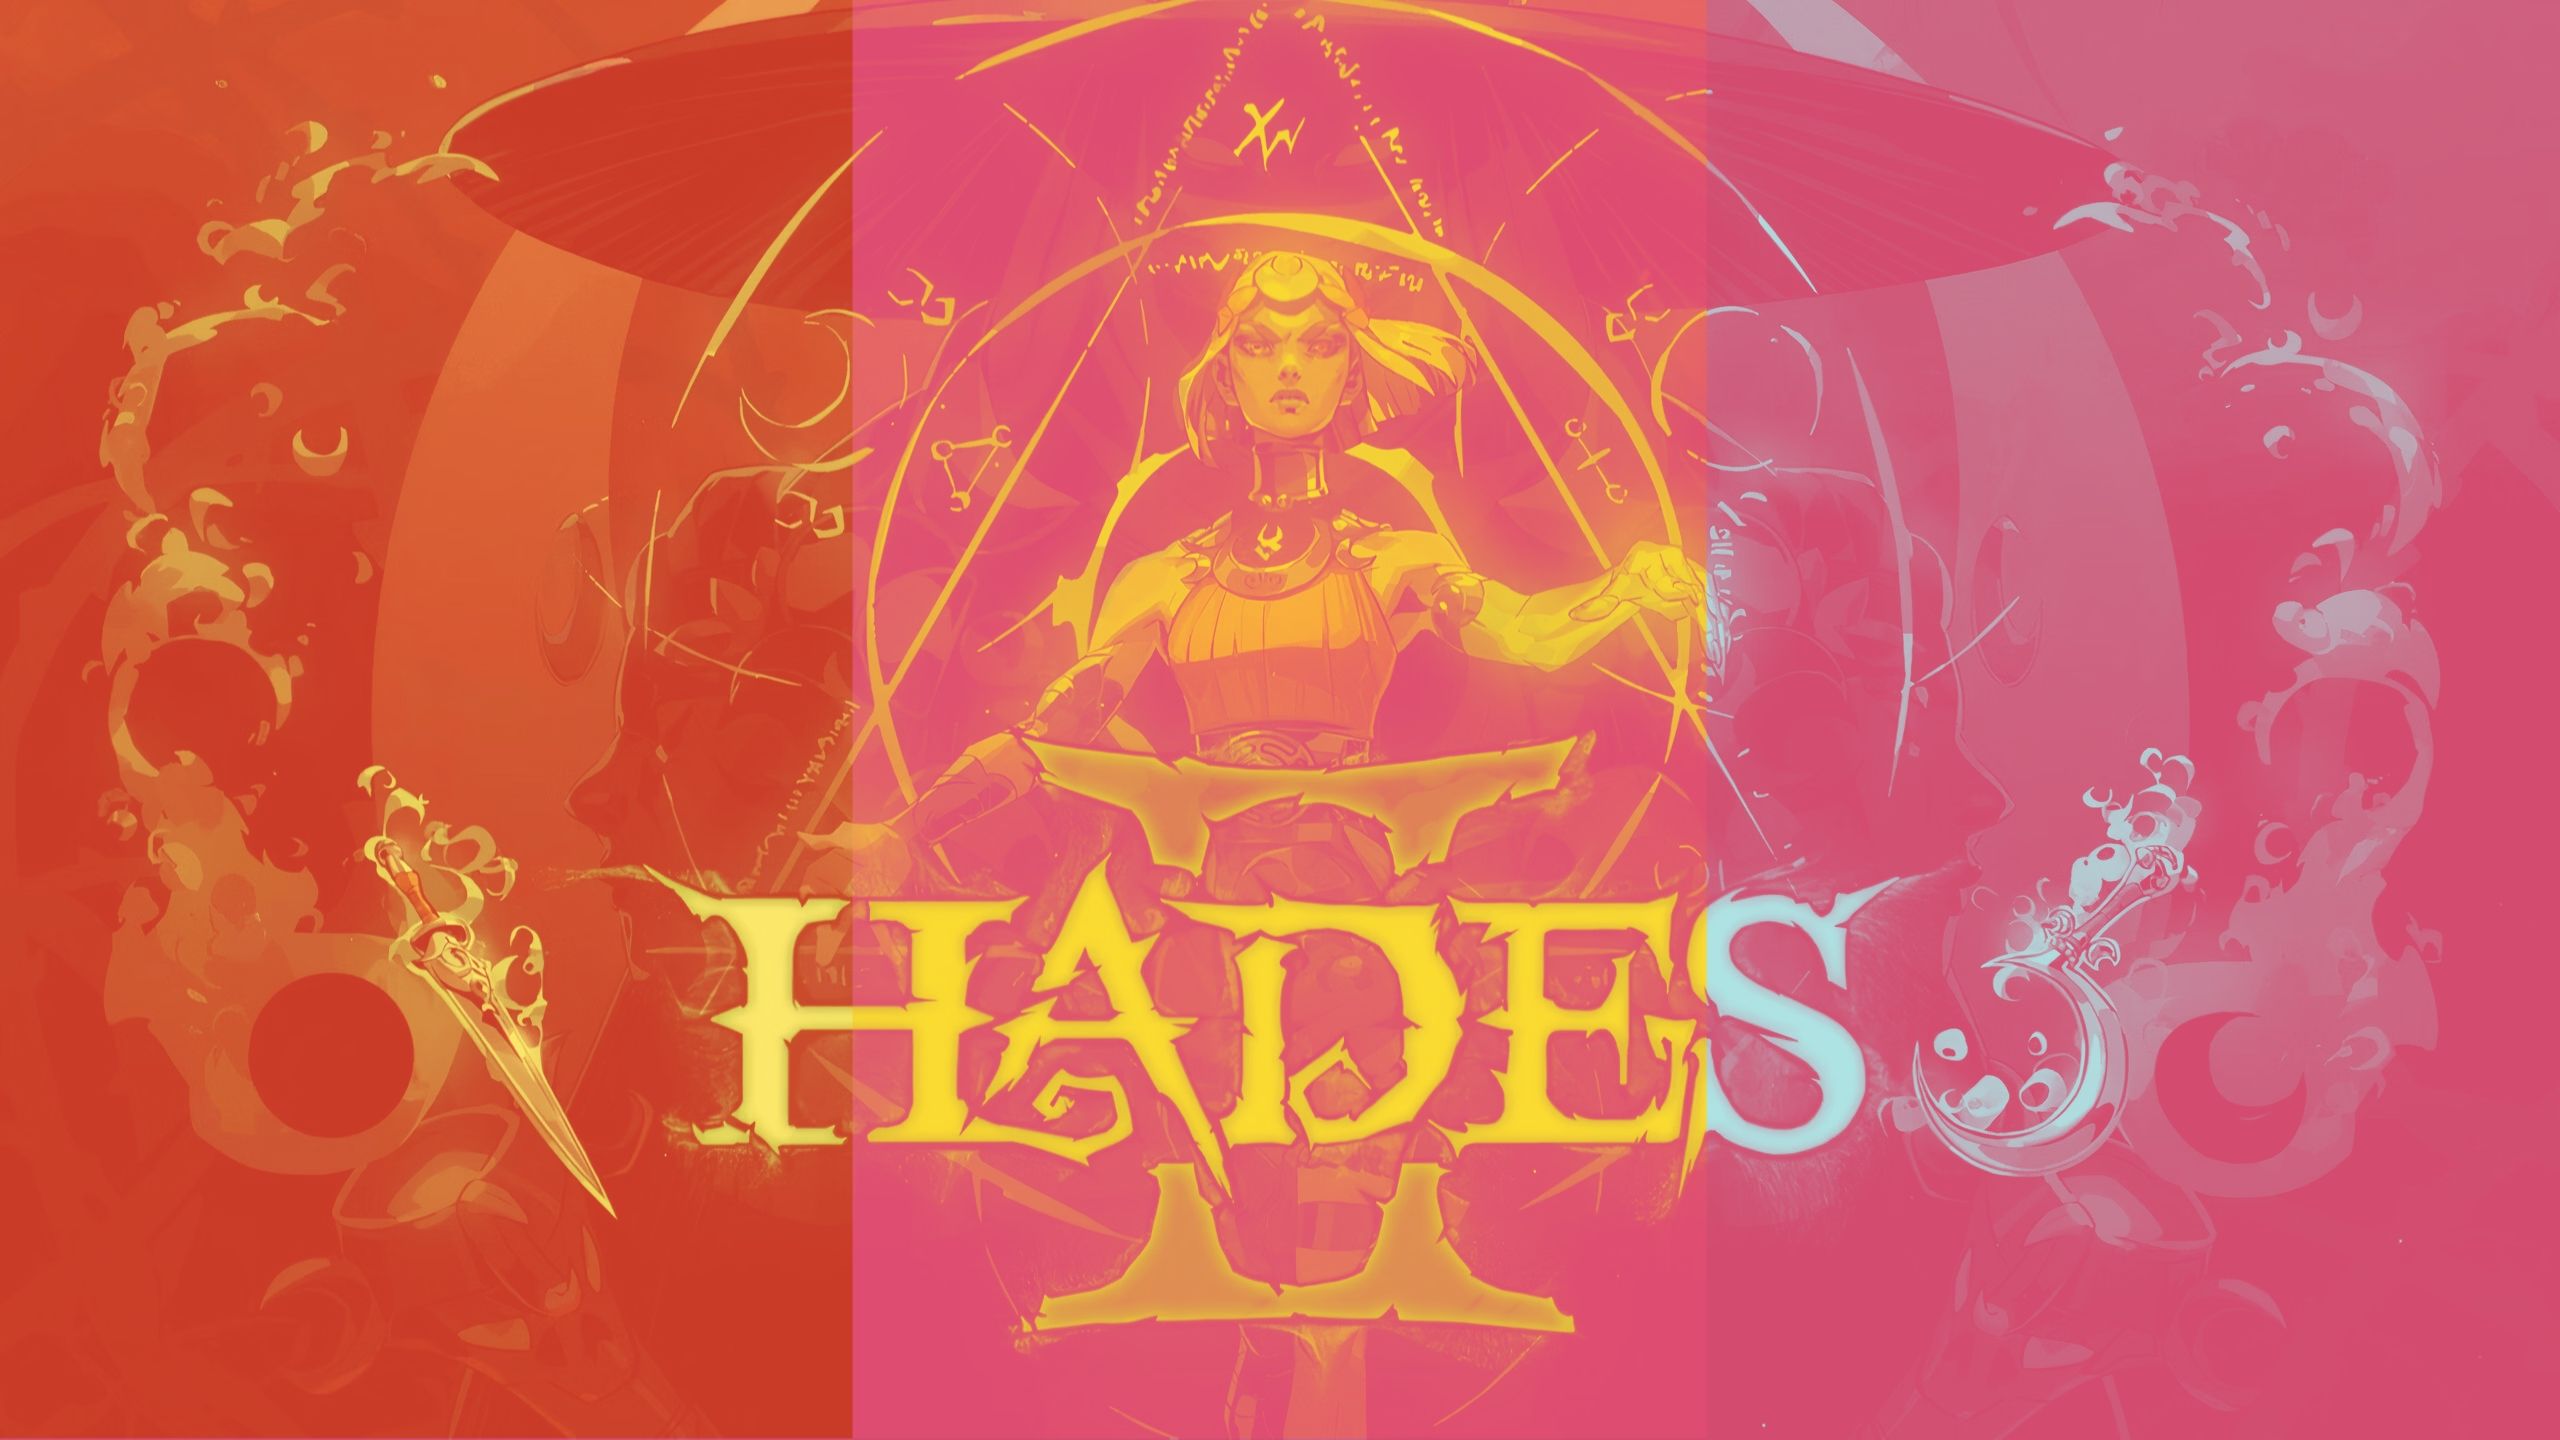 Hades 2 is the best unfinished game I’ve played